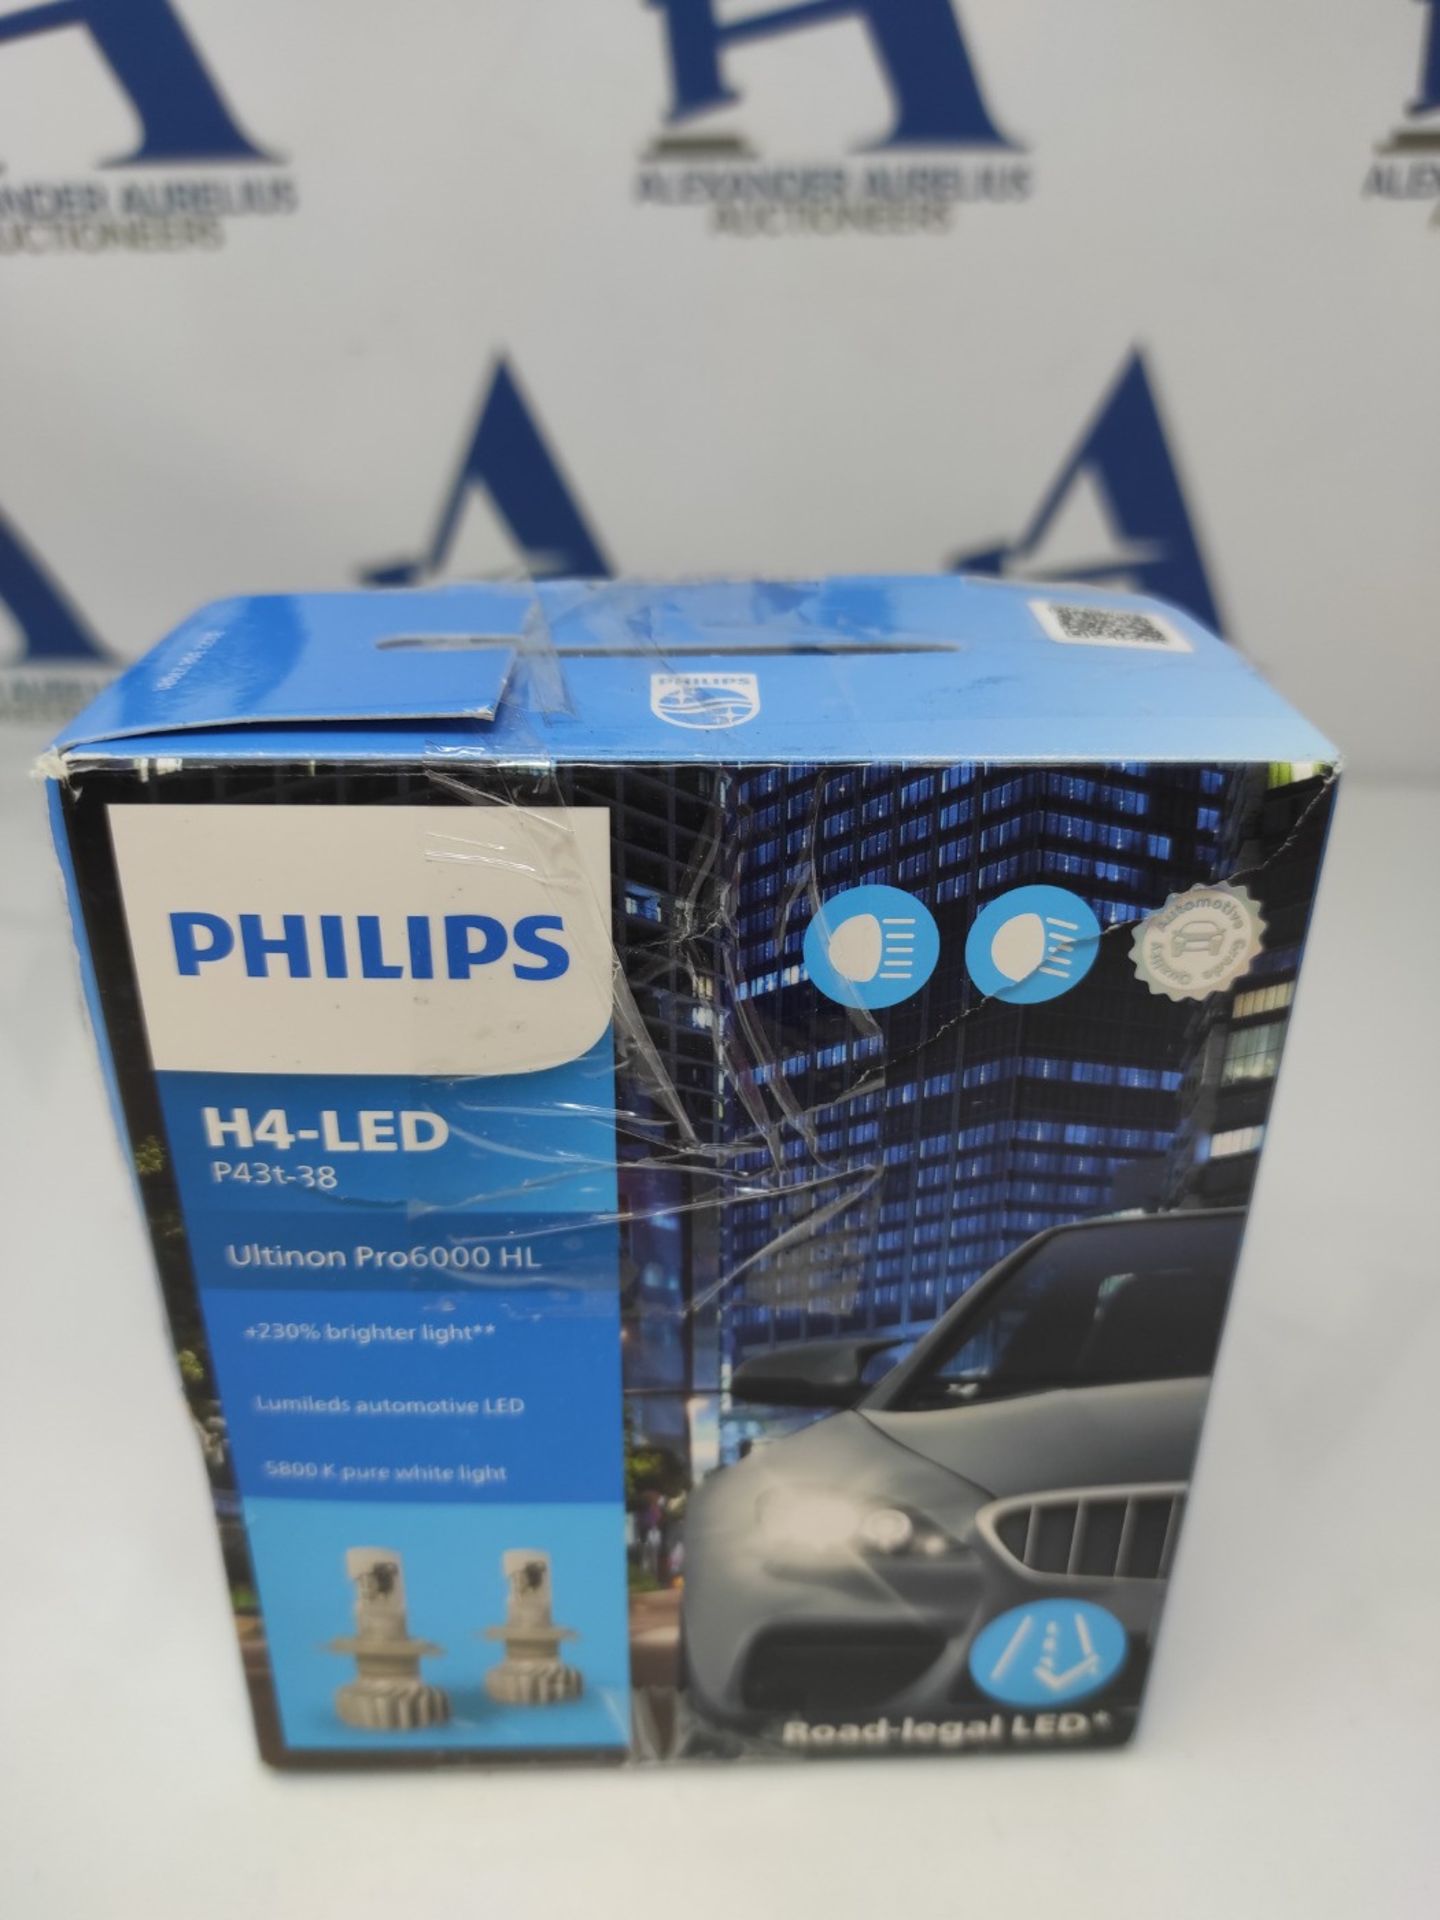 RRP £94.00 Philips Ultinon Pro6000 H4-LED headlight bulb with road approval, 230% brighter light, - Image 2 of 3